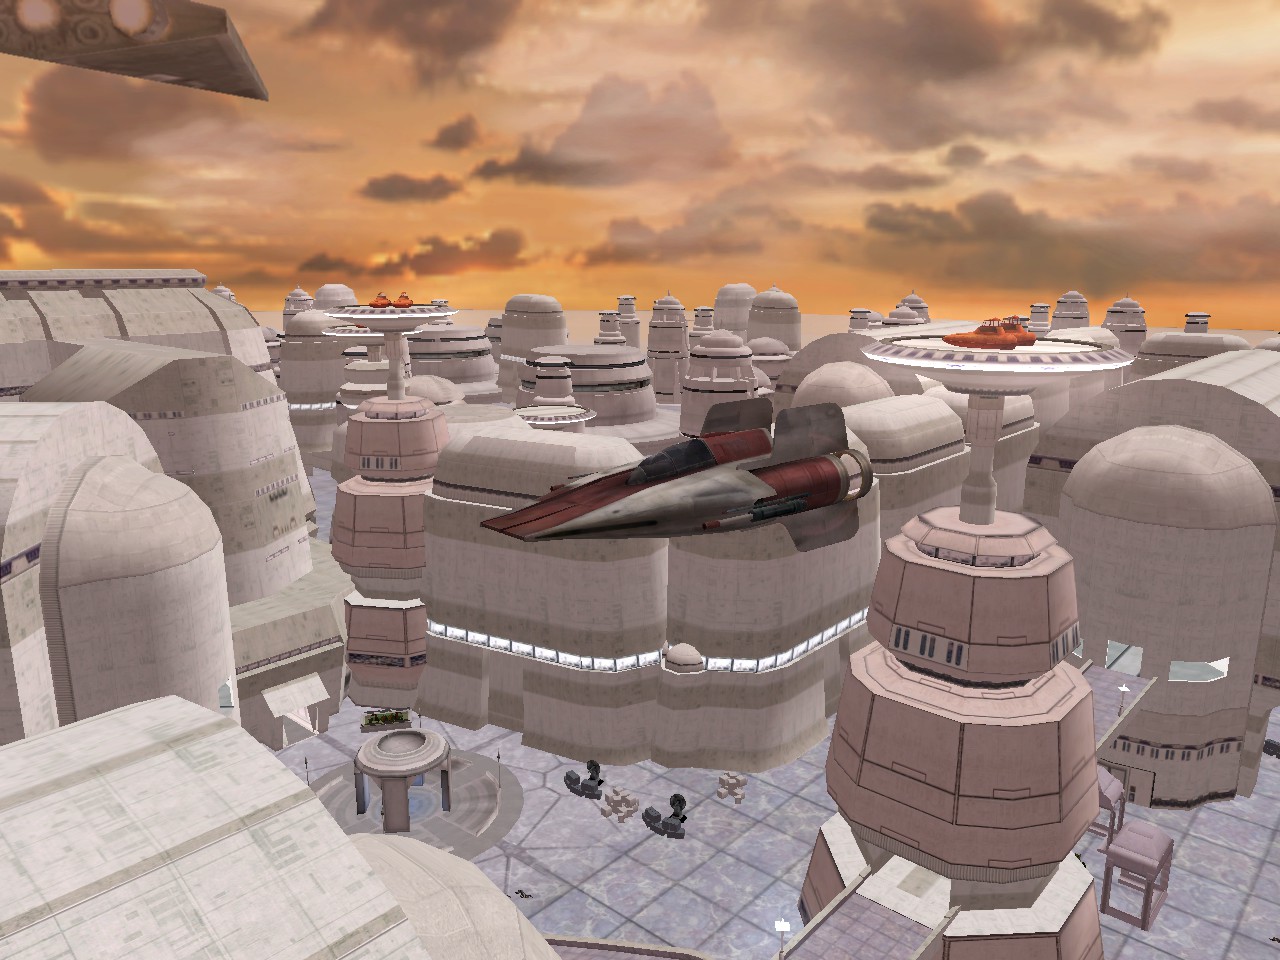 bespin-release-news-trench-war-mod-for-star-wars-battlefront-ii-moddb